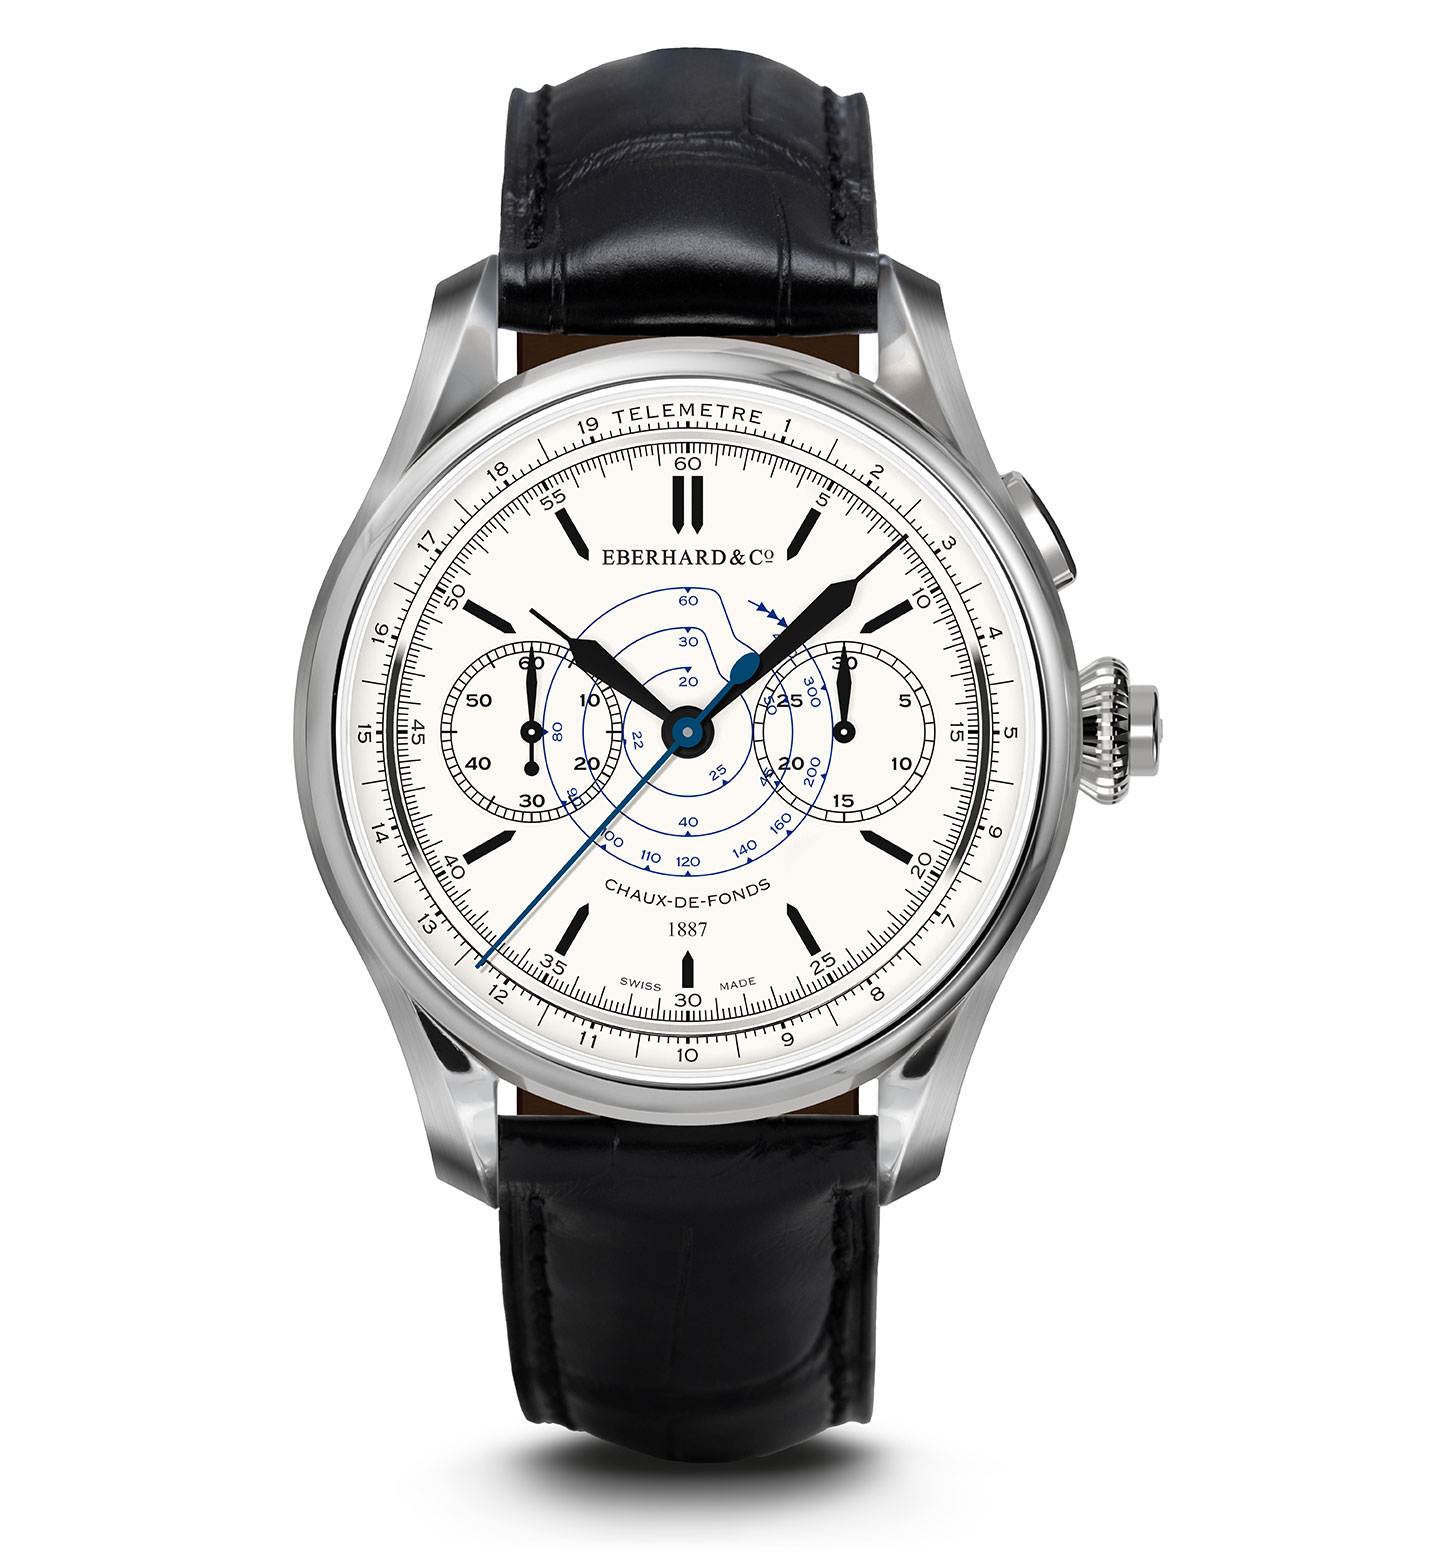 Eberhard Chronograph 1887 Édition Limitée with white dial